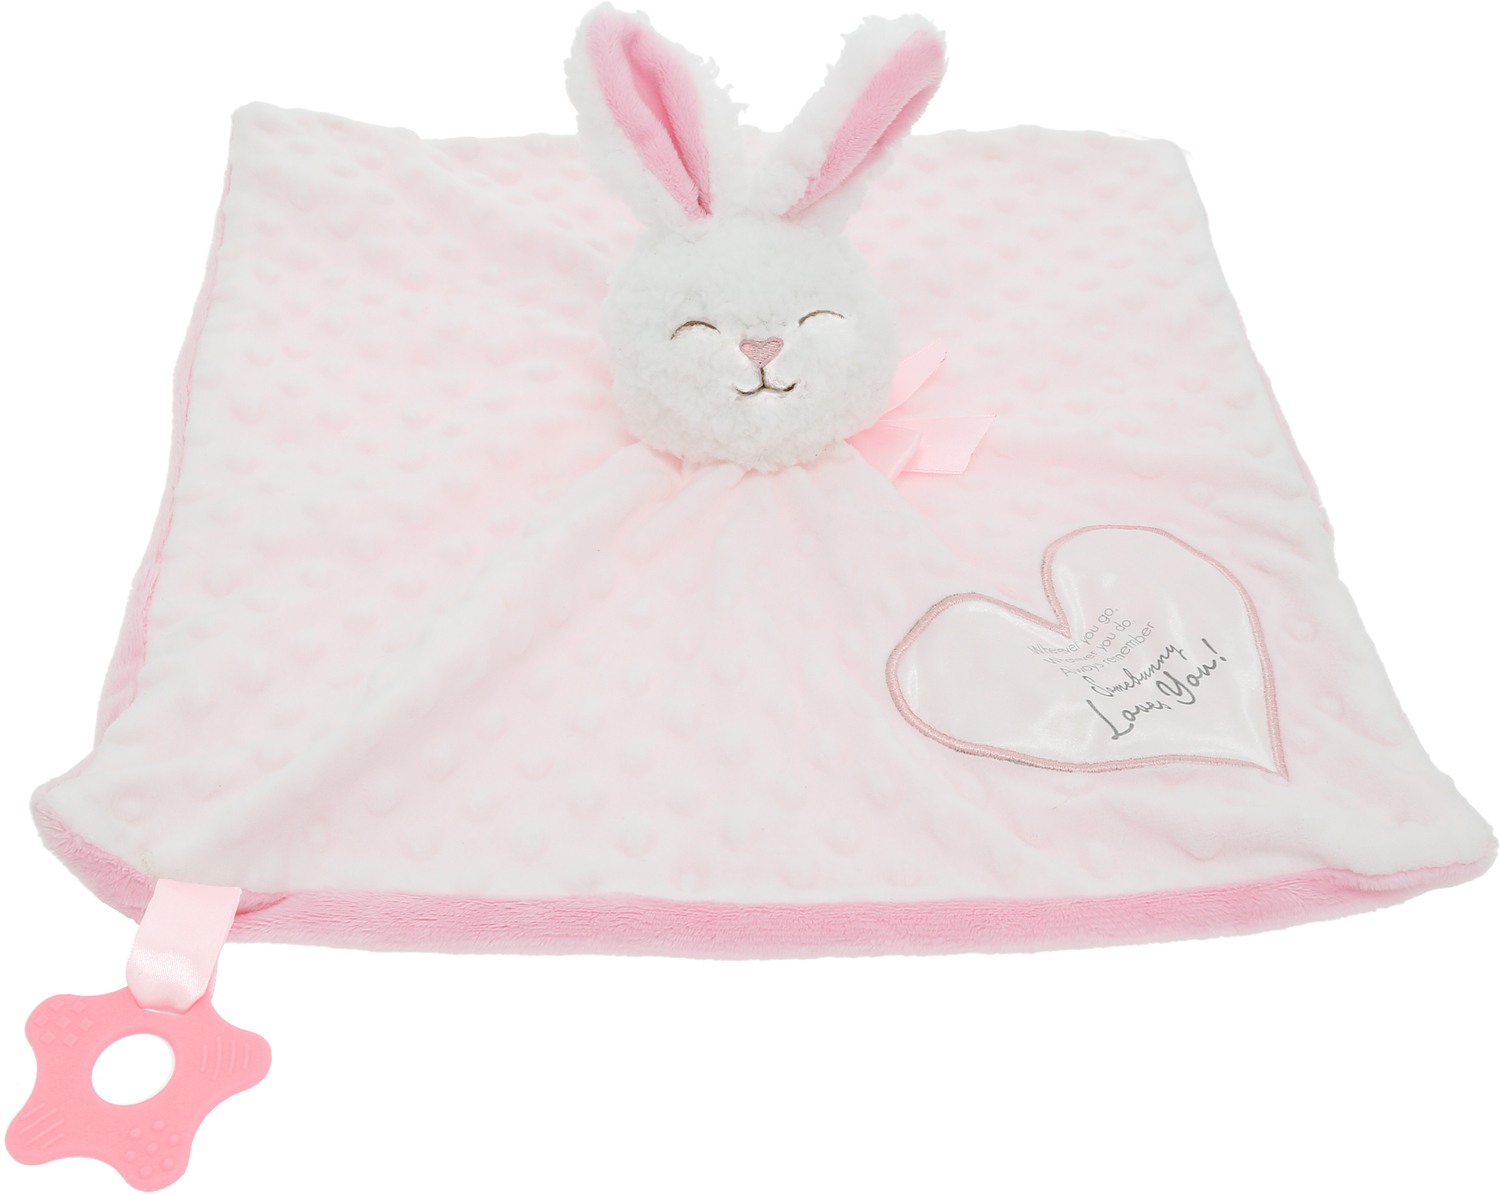 Somebunny Pink Lovey by Comfort Collection - Somebunny Pink Lovey - Lovey Blanket Bunny with Teether